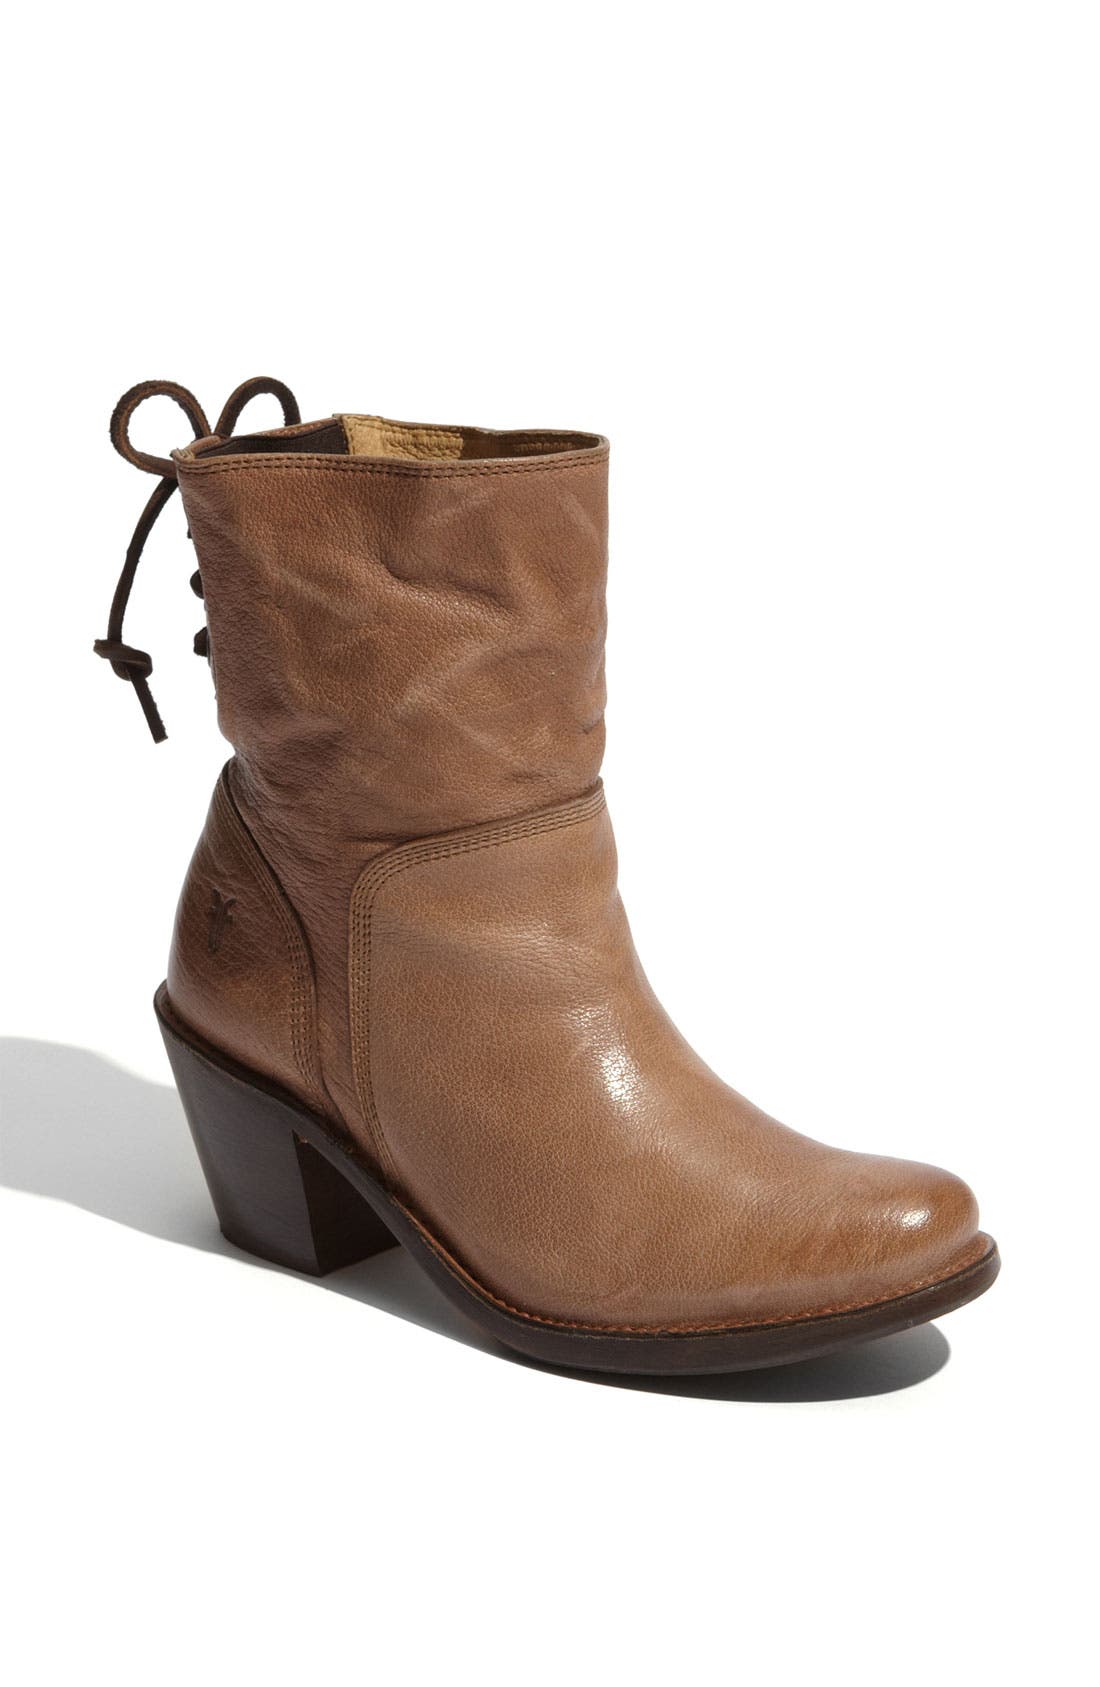 michael kors april leather and knit boot